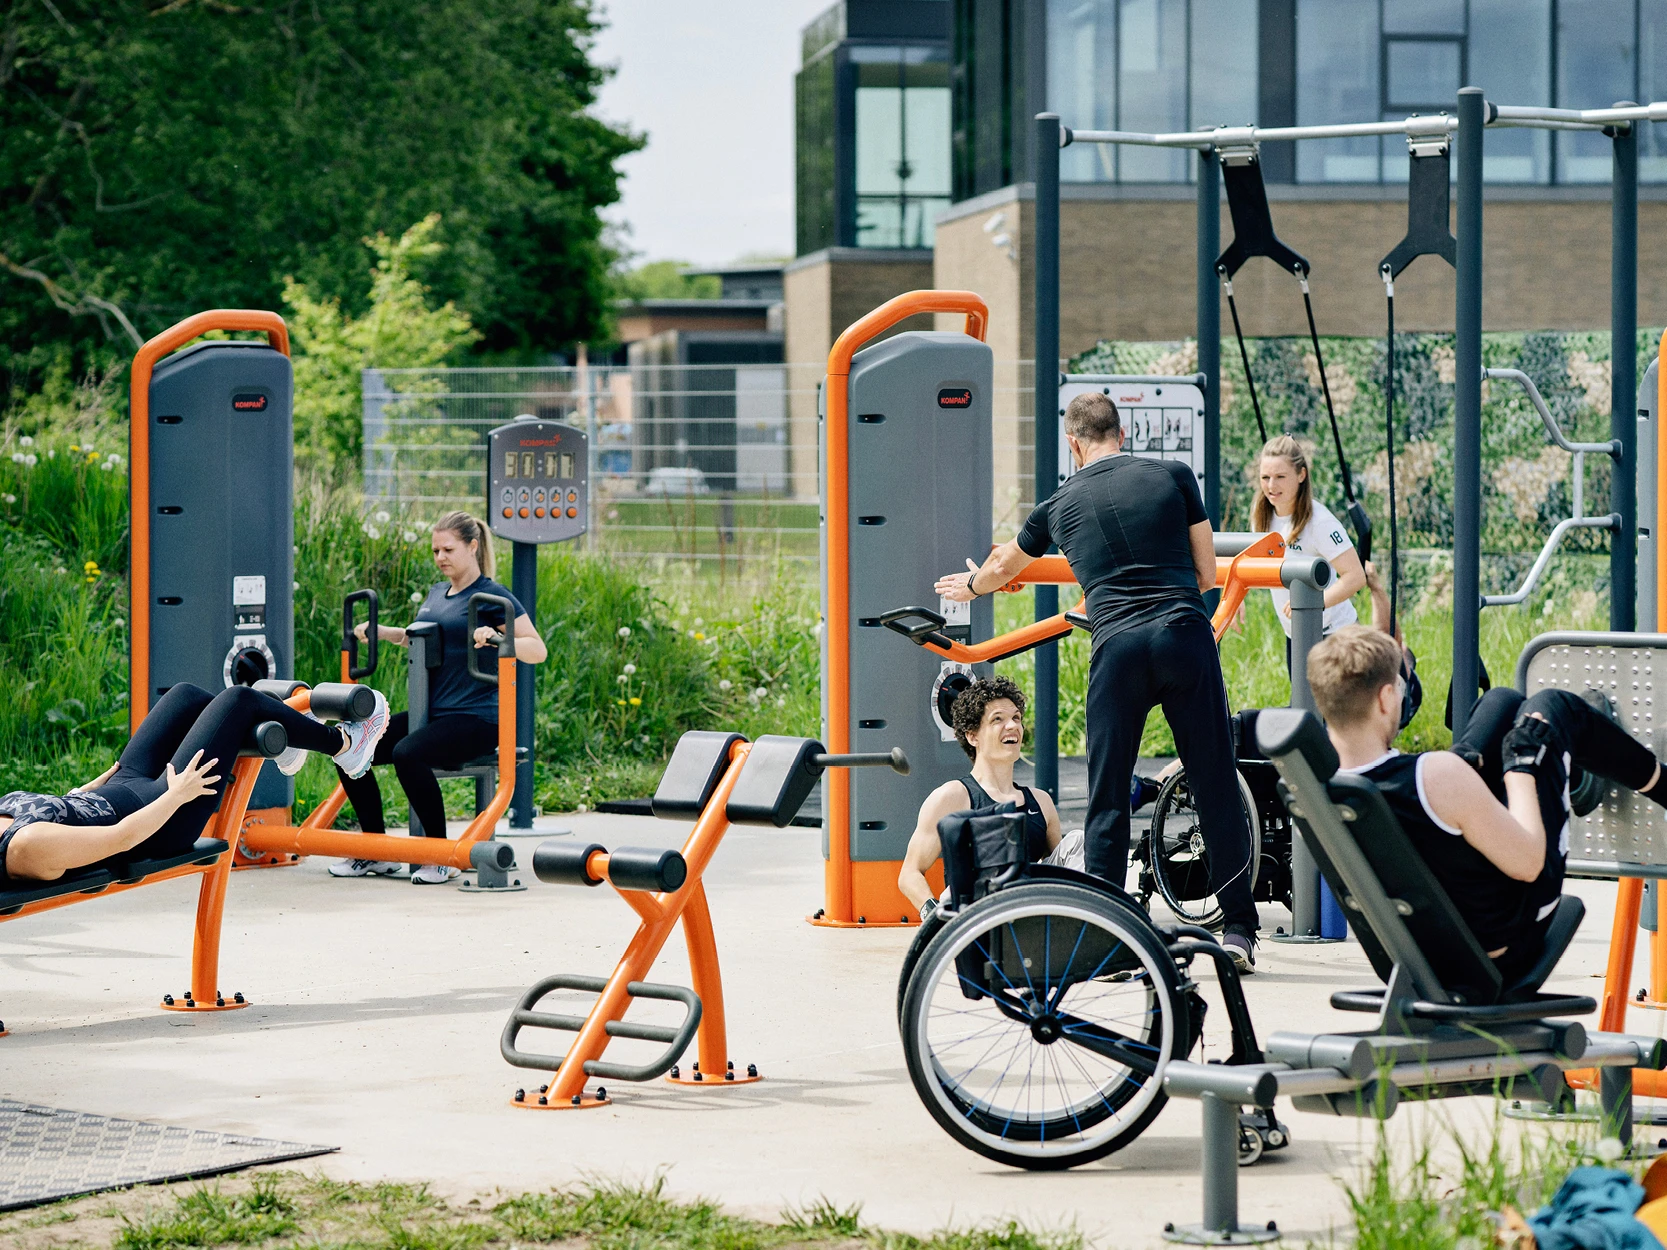 A group of people using exercise equipment in a park 